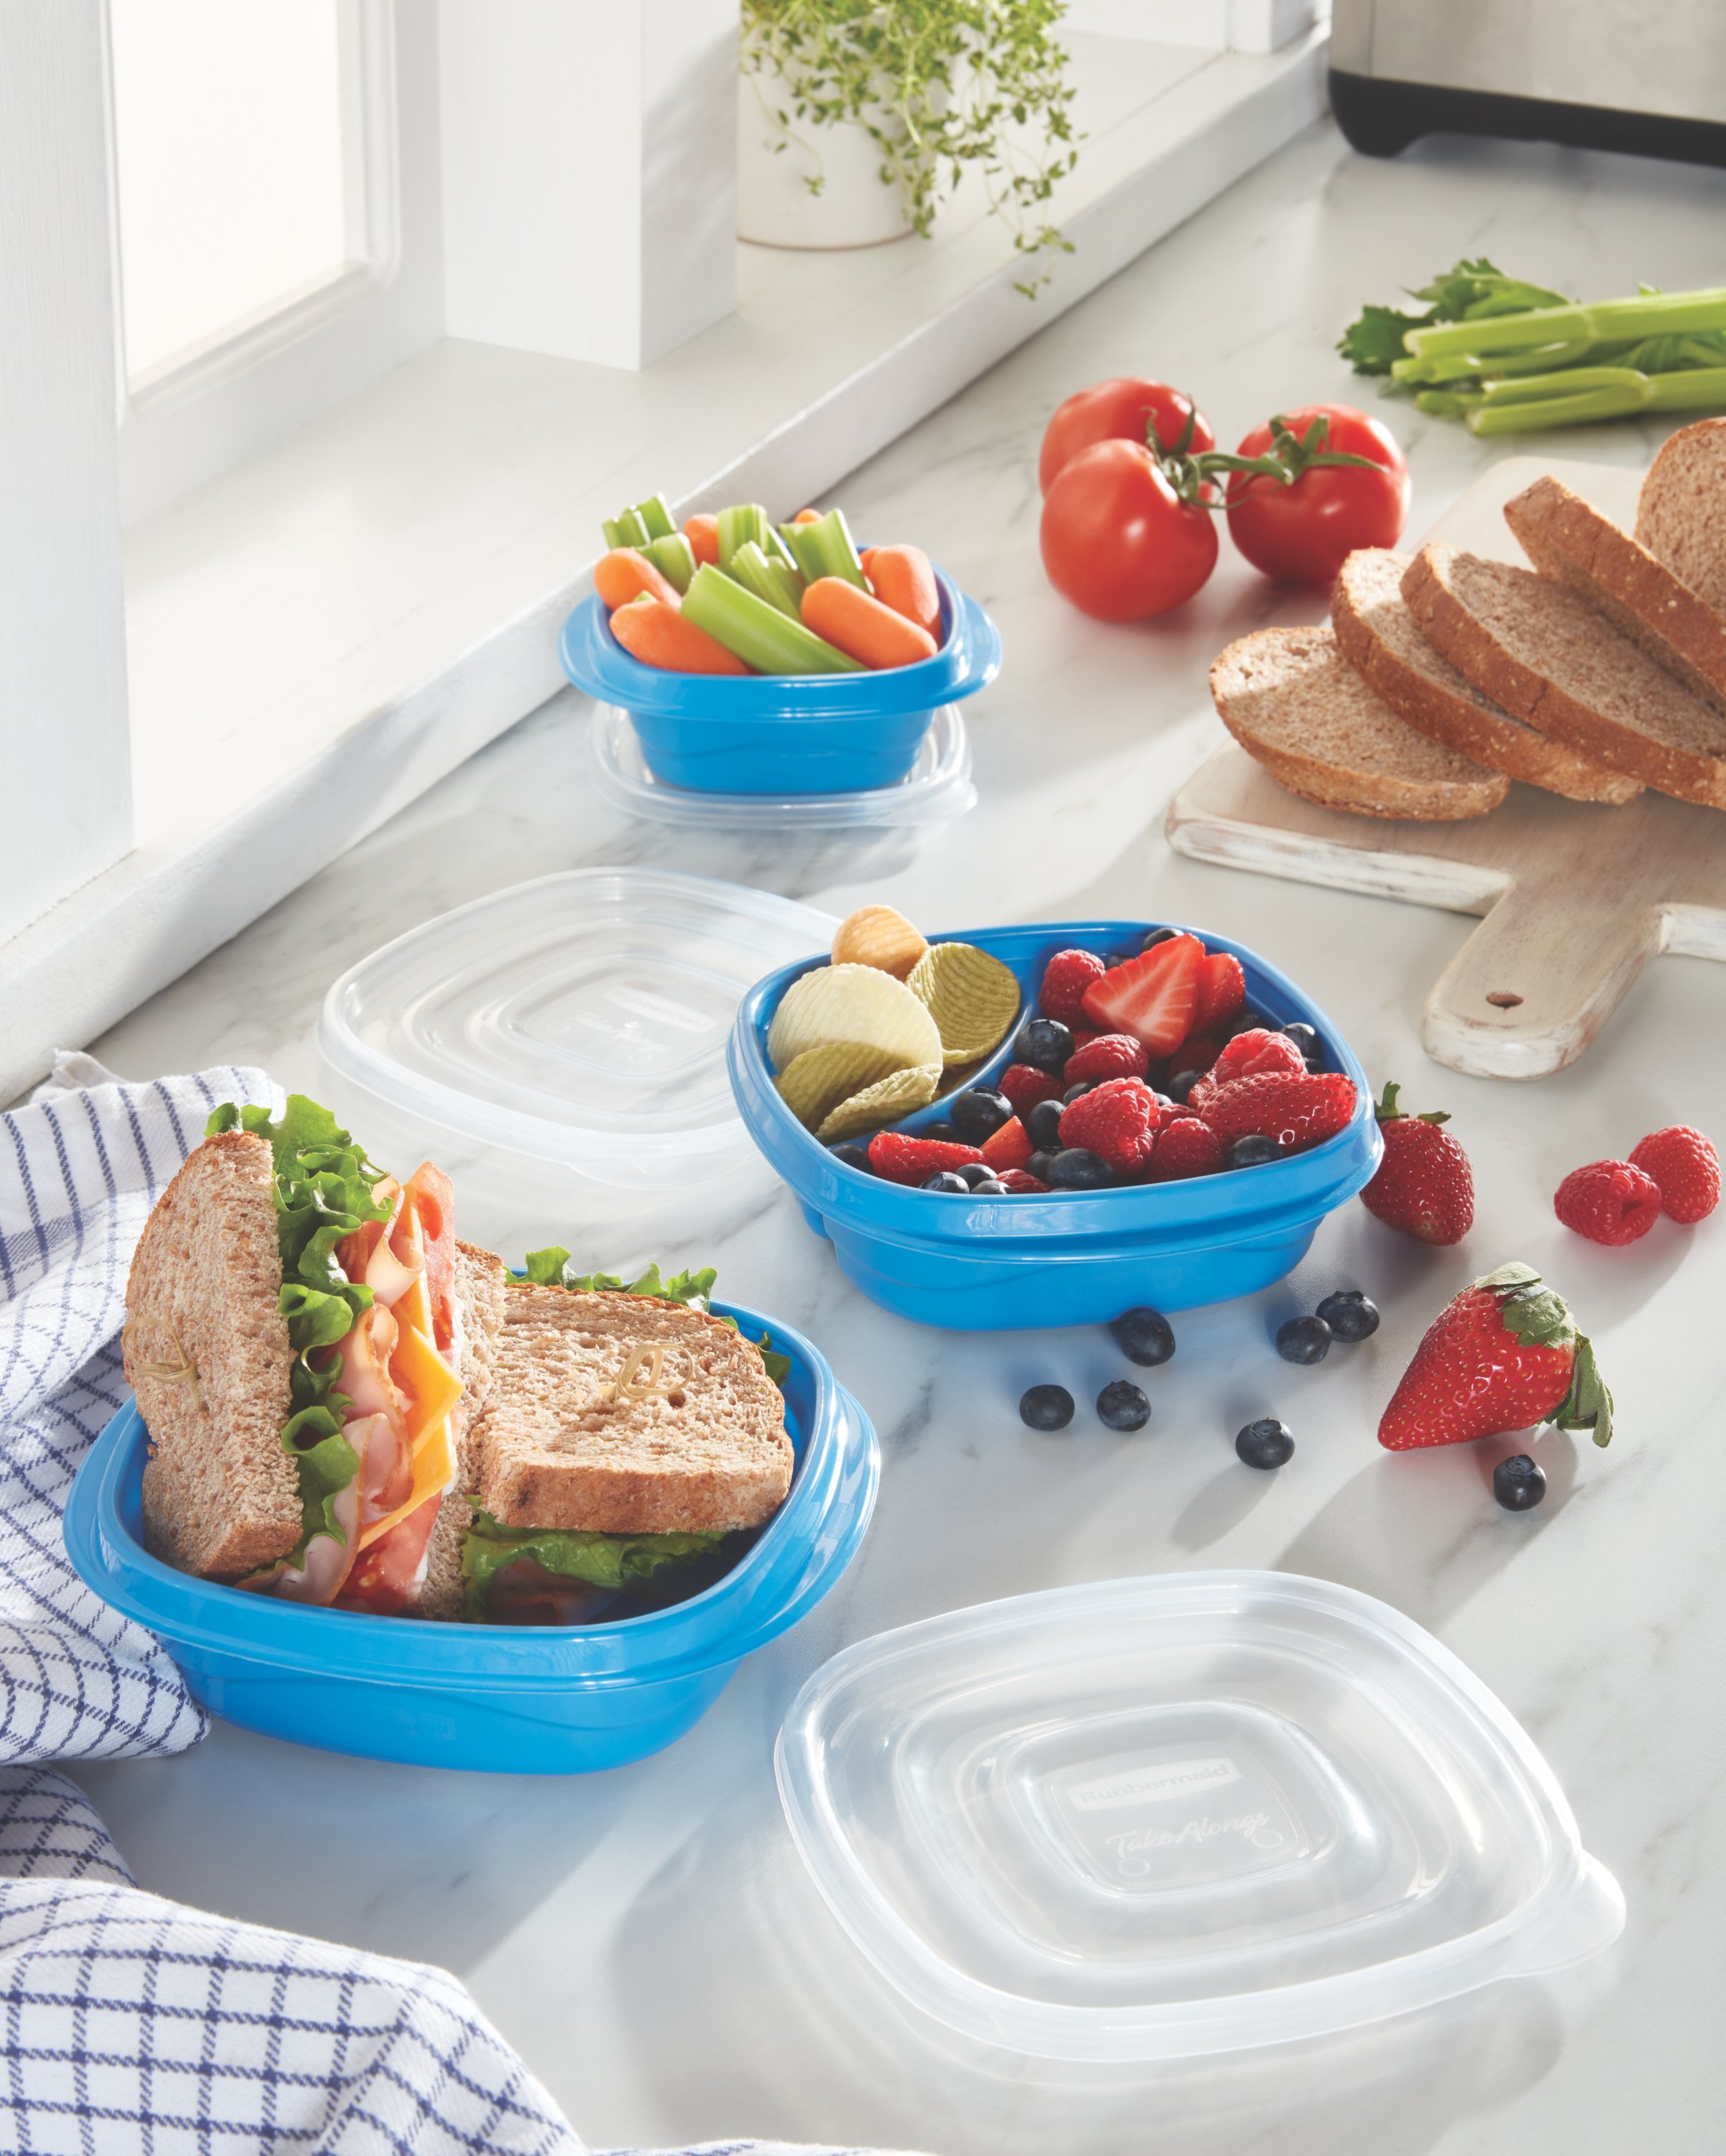 TakeAlongs® Small Square Food Storage Containers